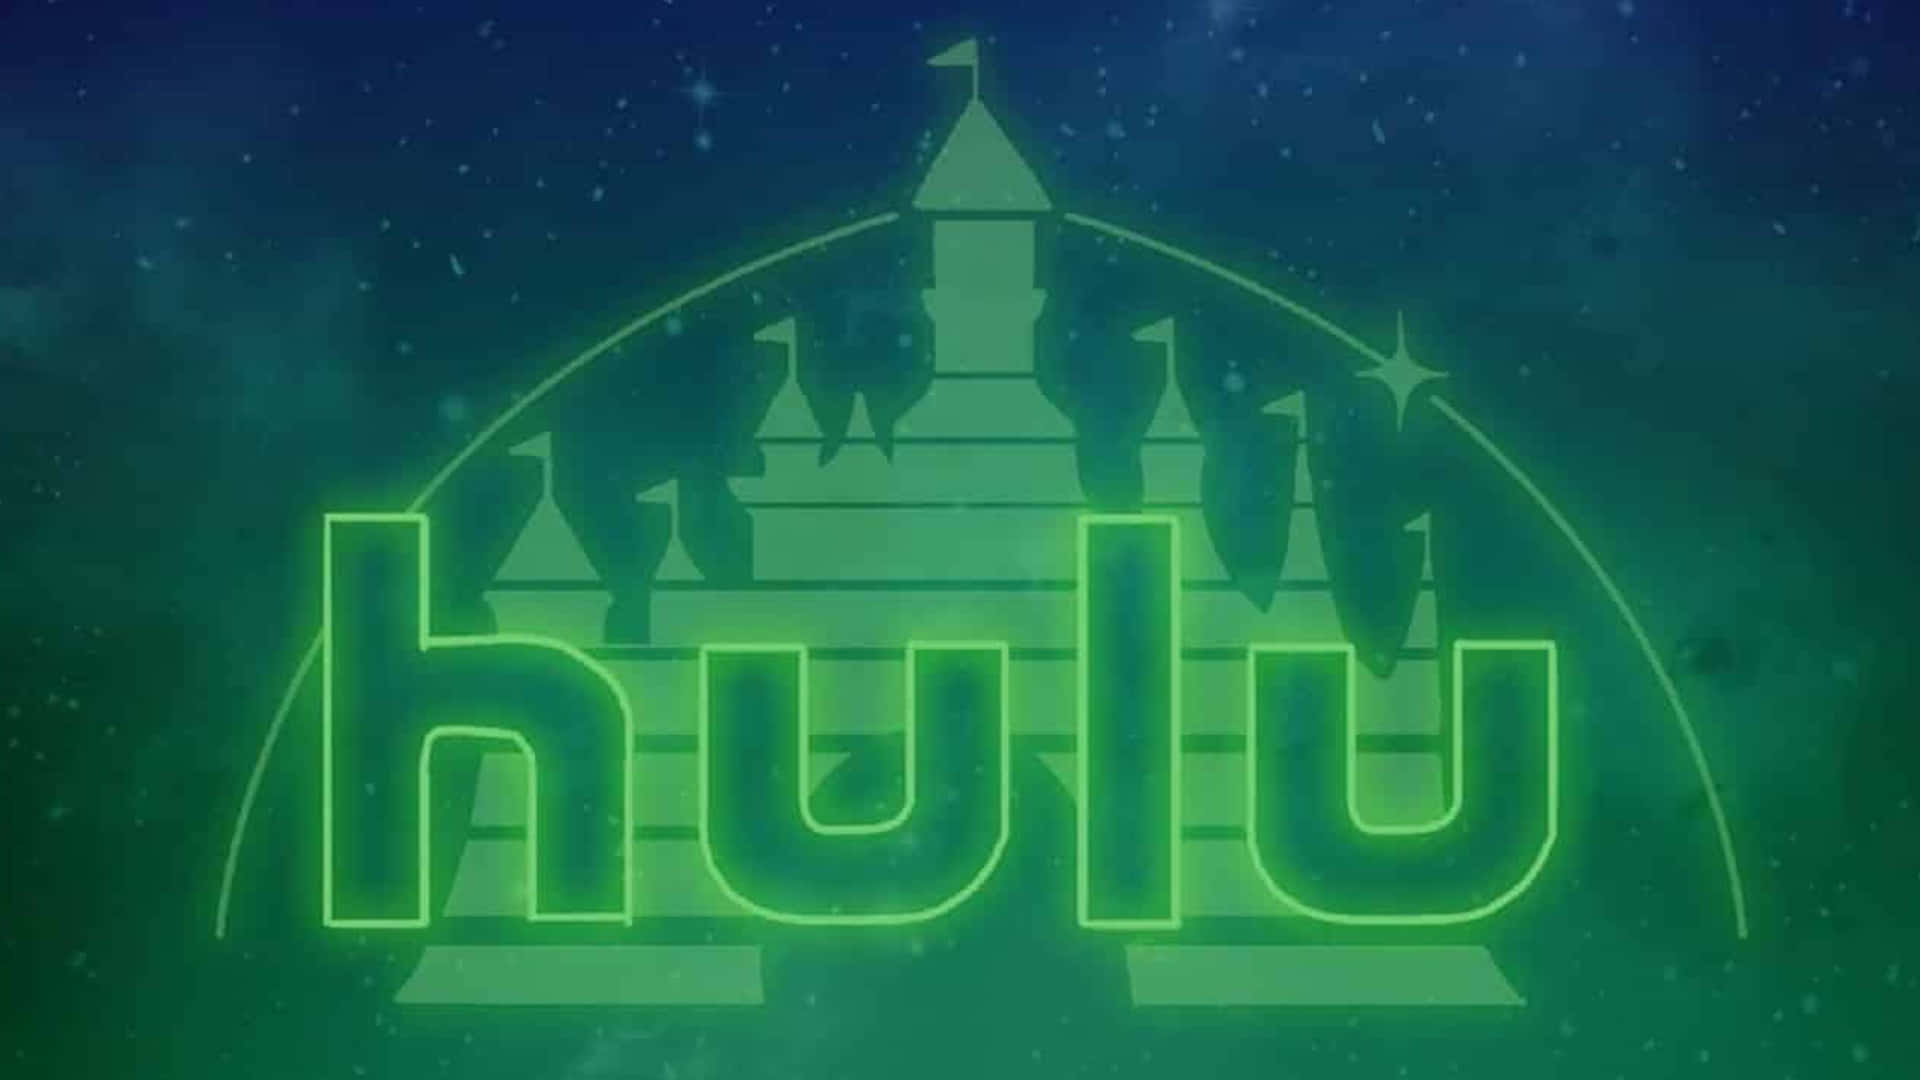 Watch Hulu and discover new worlds